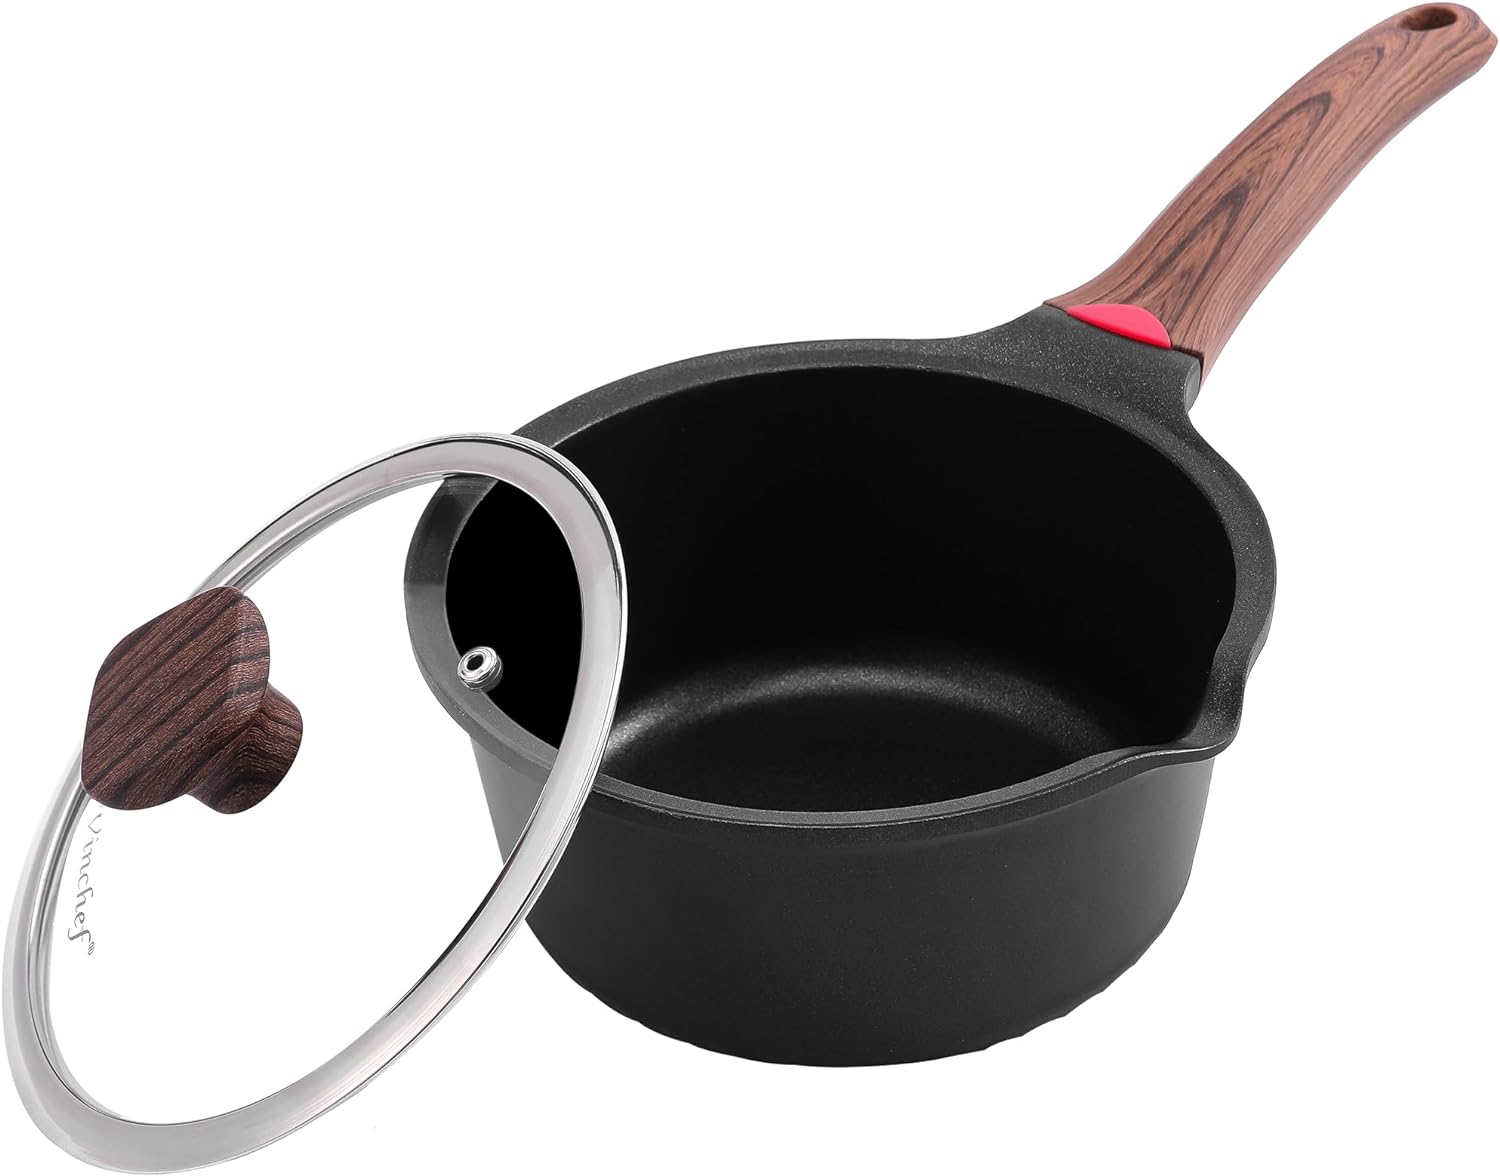 I bought this pot specifically for heating milk (for grandkids hot chocolate)  works great. Heated milk without scorching, although I did stir constantly when the milk was hot. Easy to assemble handle and cleans up well. Granny approved!